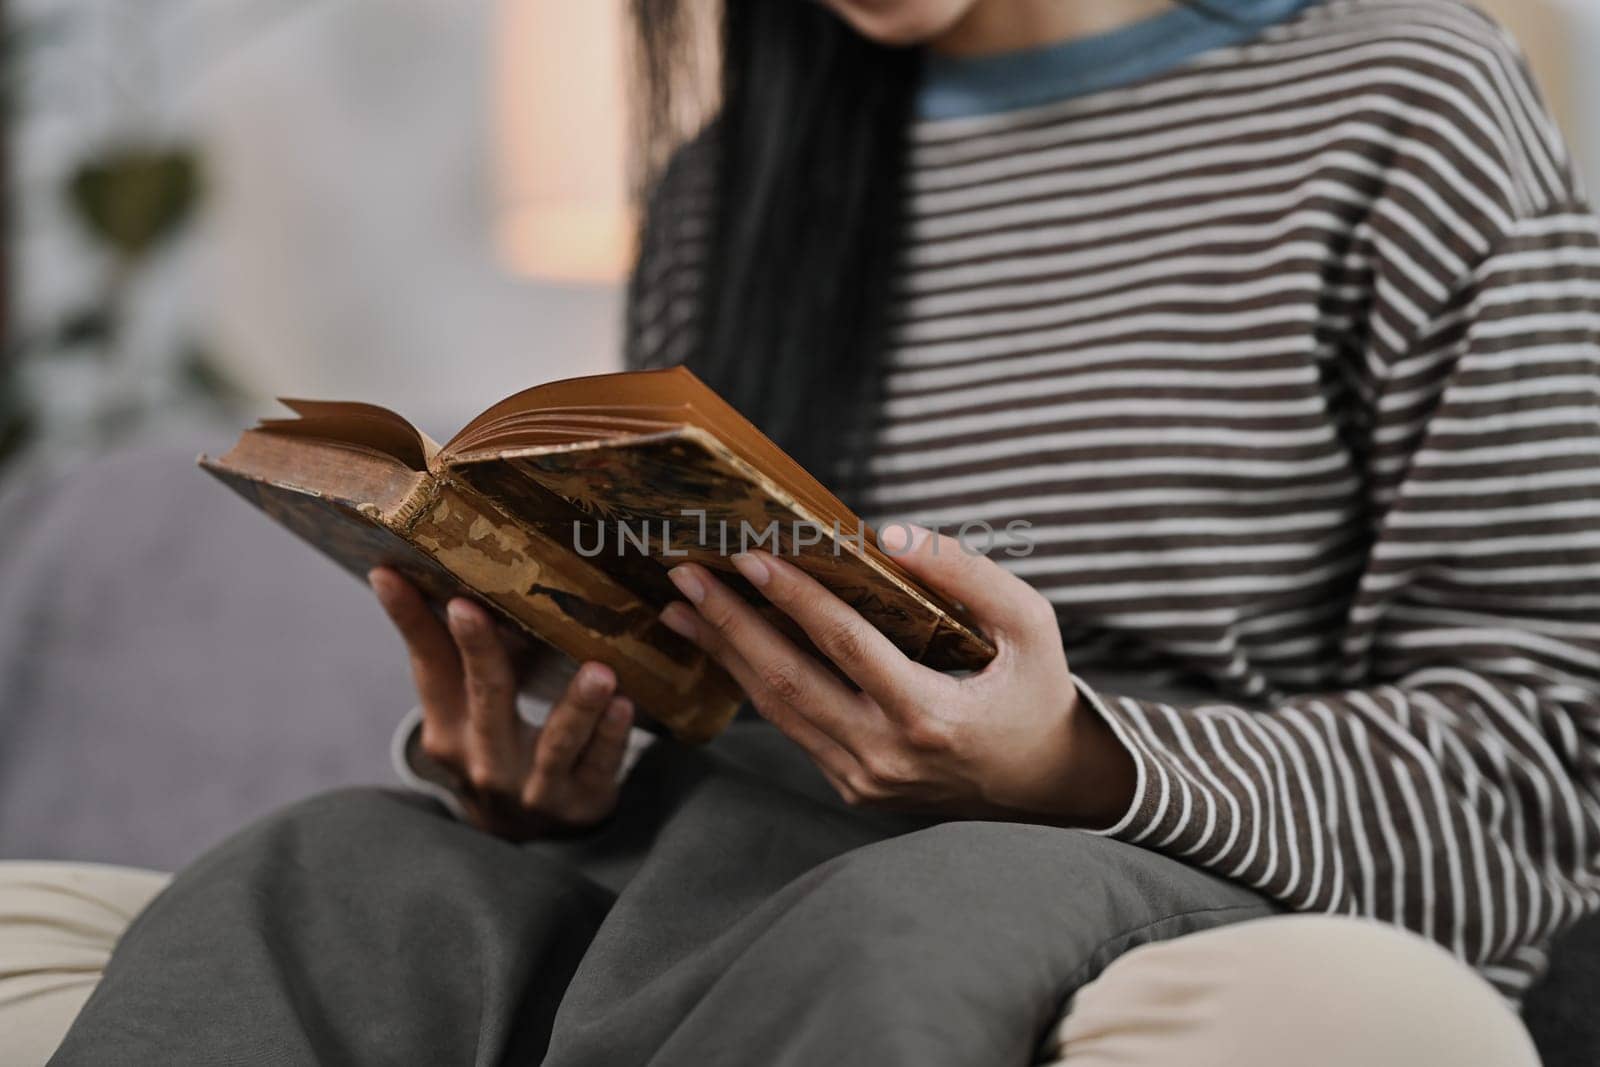 Calm young woman reading book on couch at home. People, leisure and lifestyle concept.